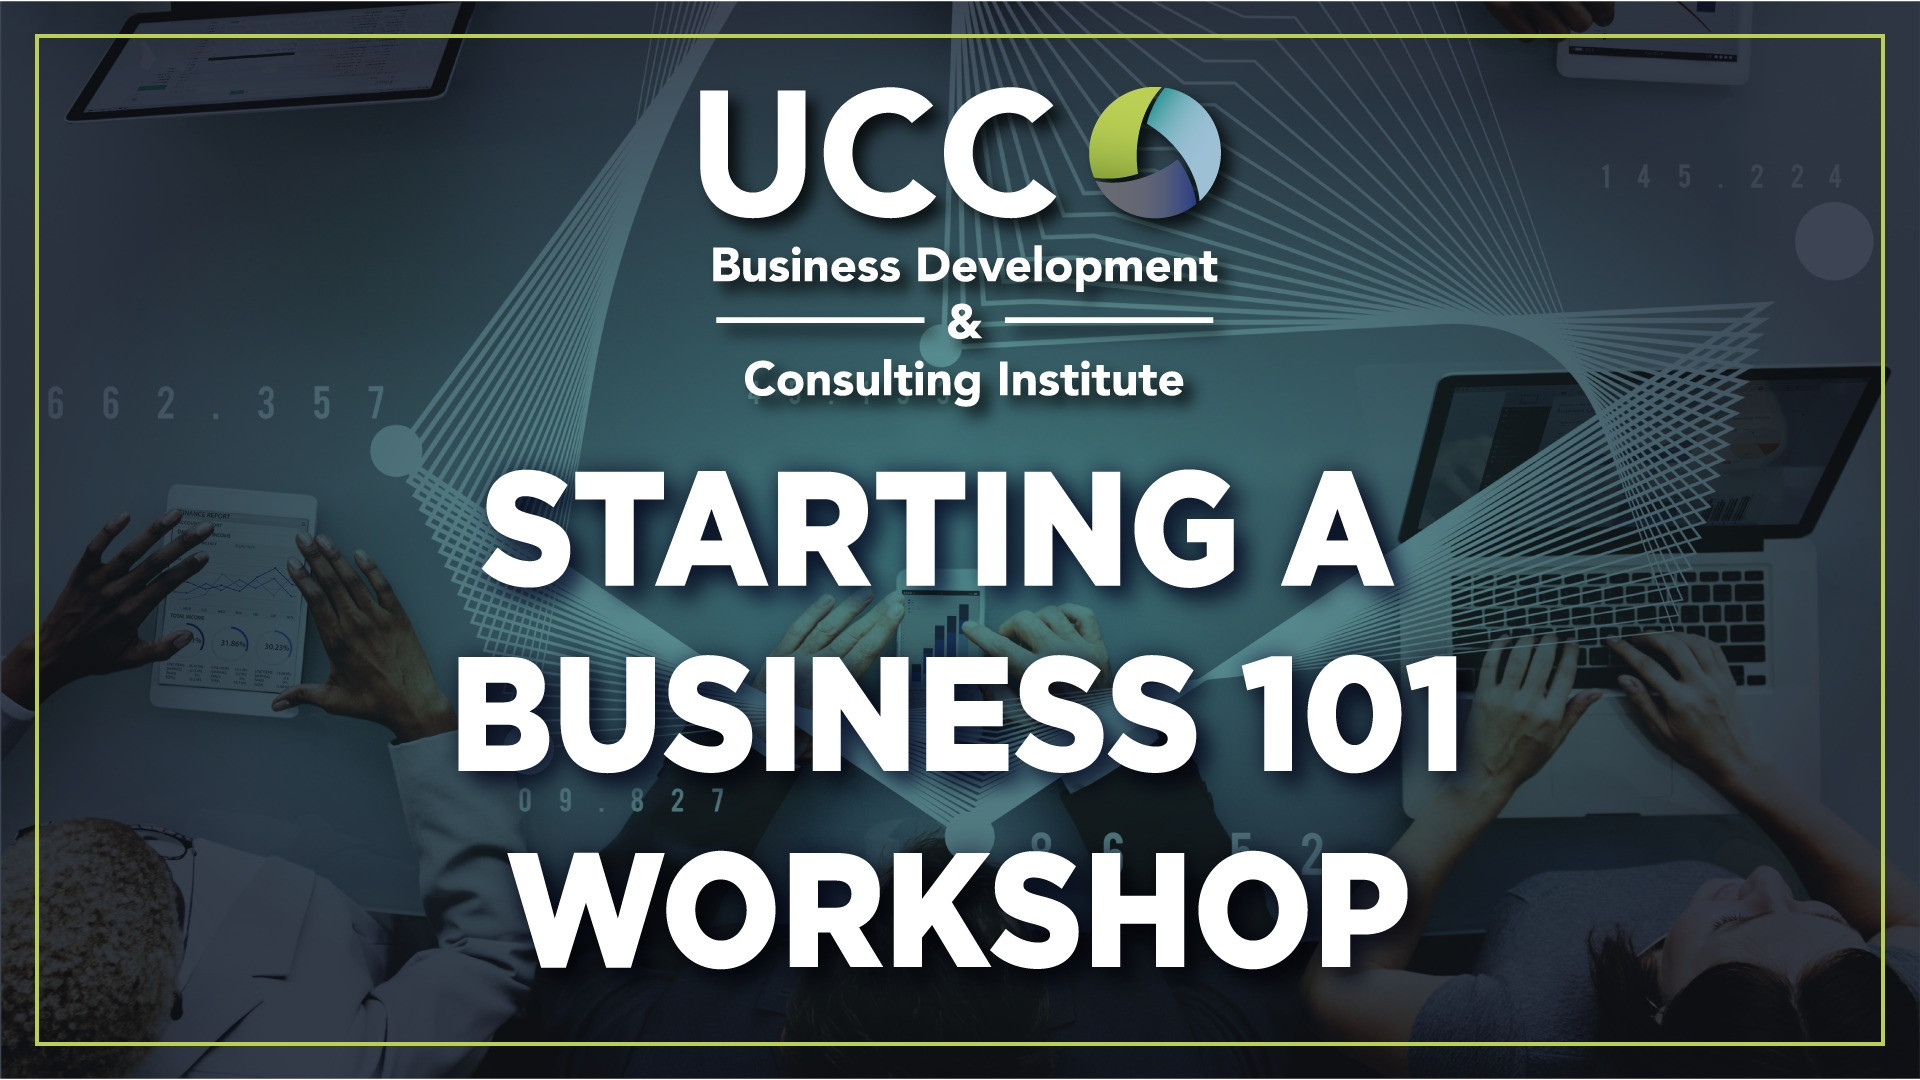 Starting a Business 101 Workshop for Entrepreneurs & Their Staff